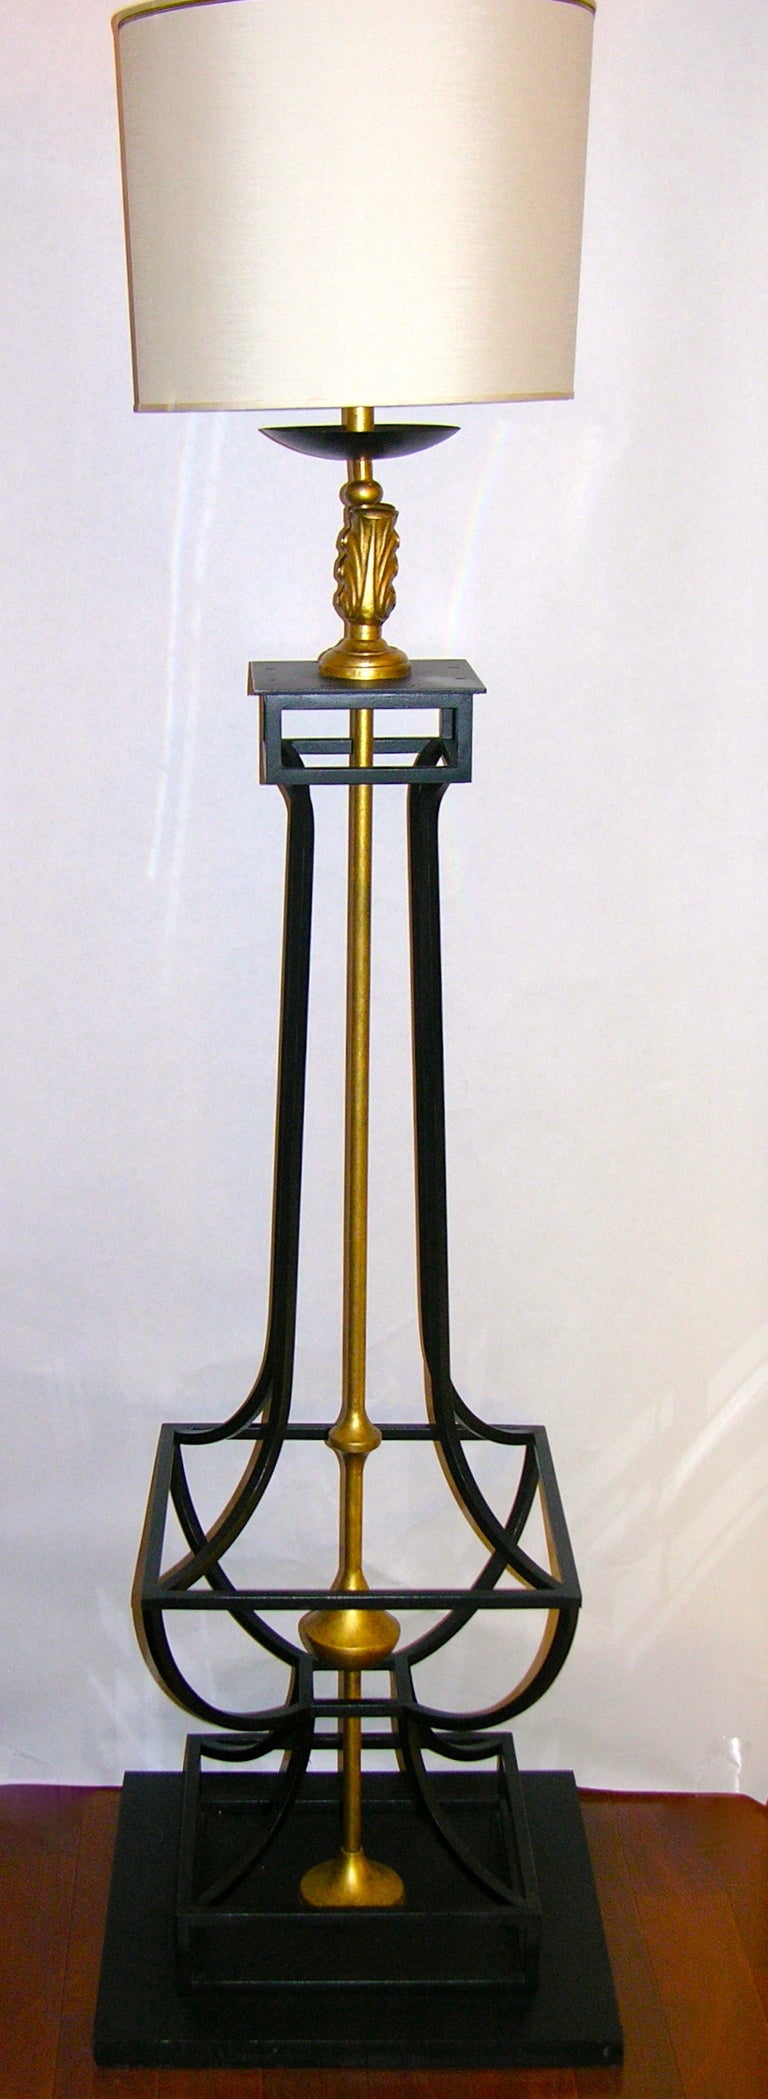 20th Century 20th C. Oversized Pair Of Gilt-Iron Floor Lamps by Jacques Garcia